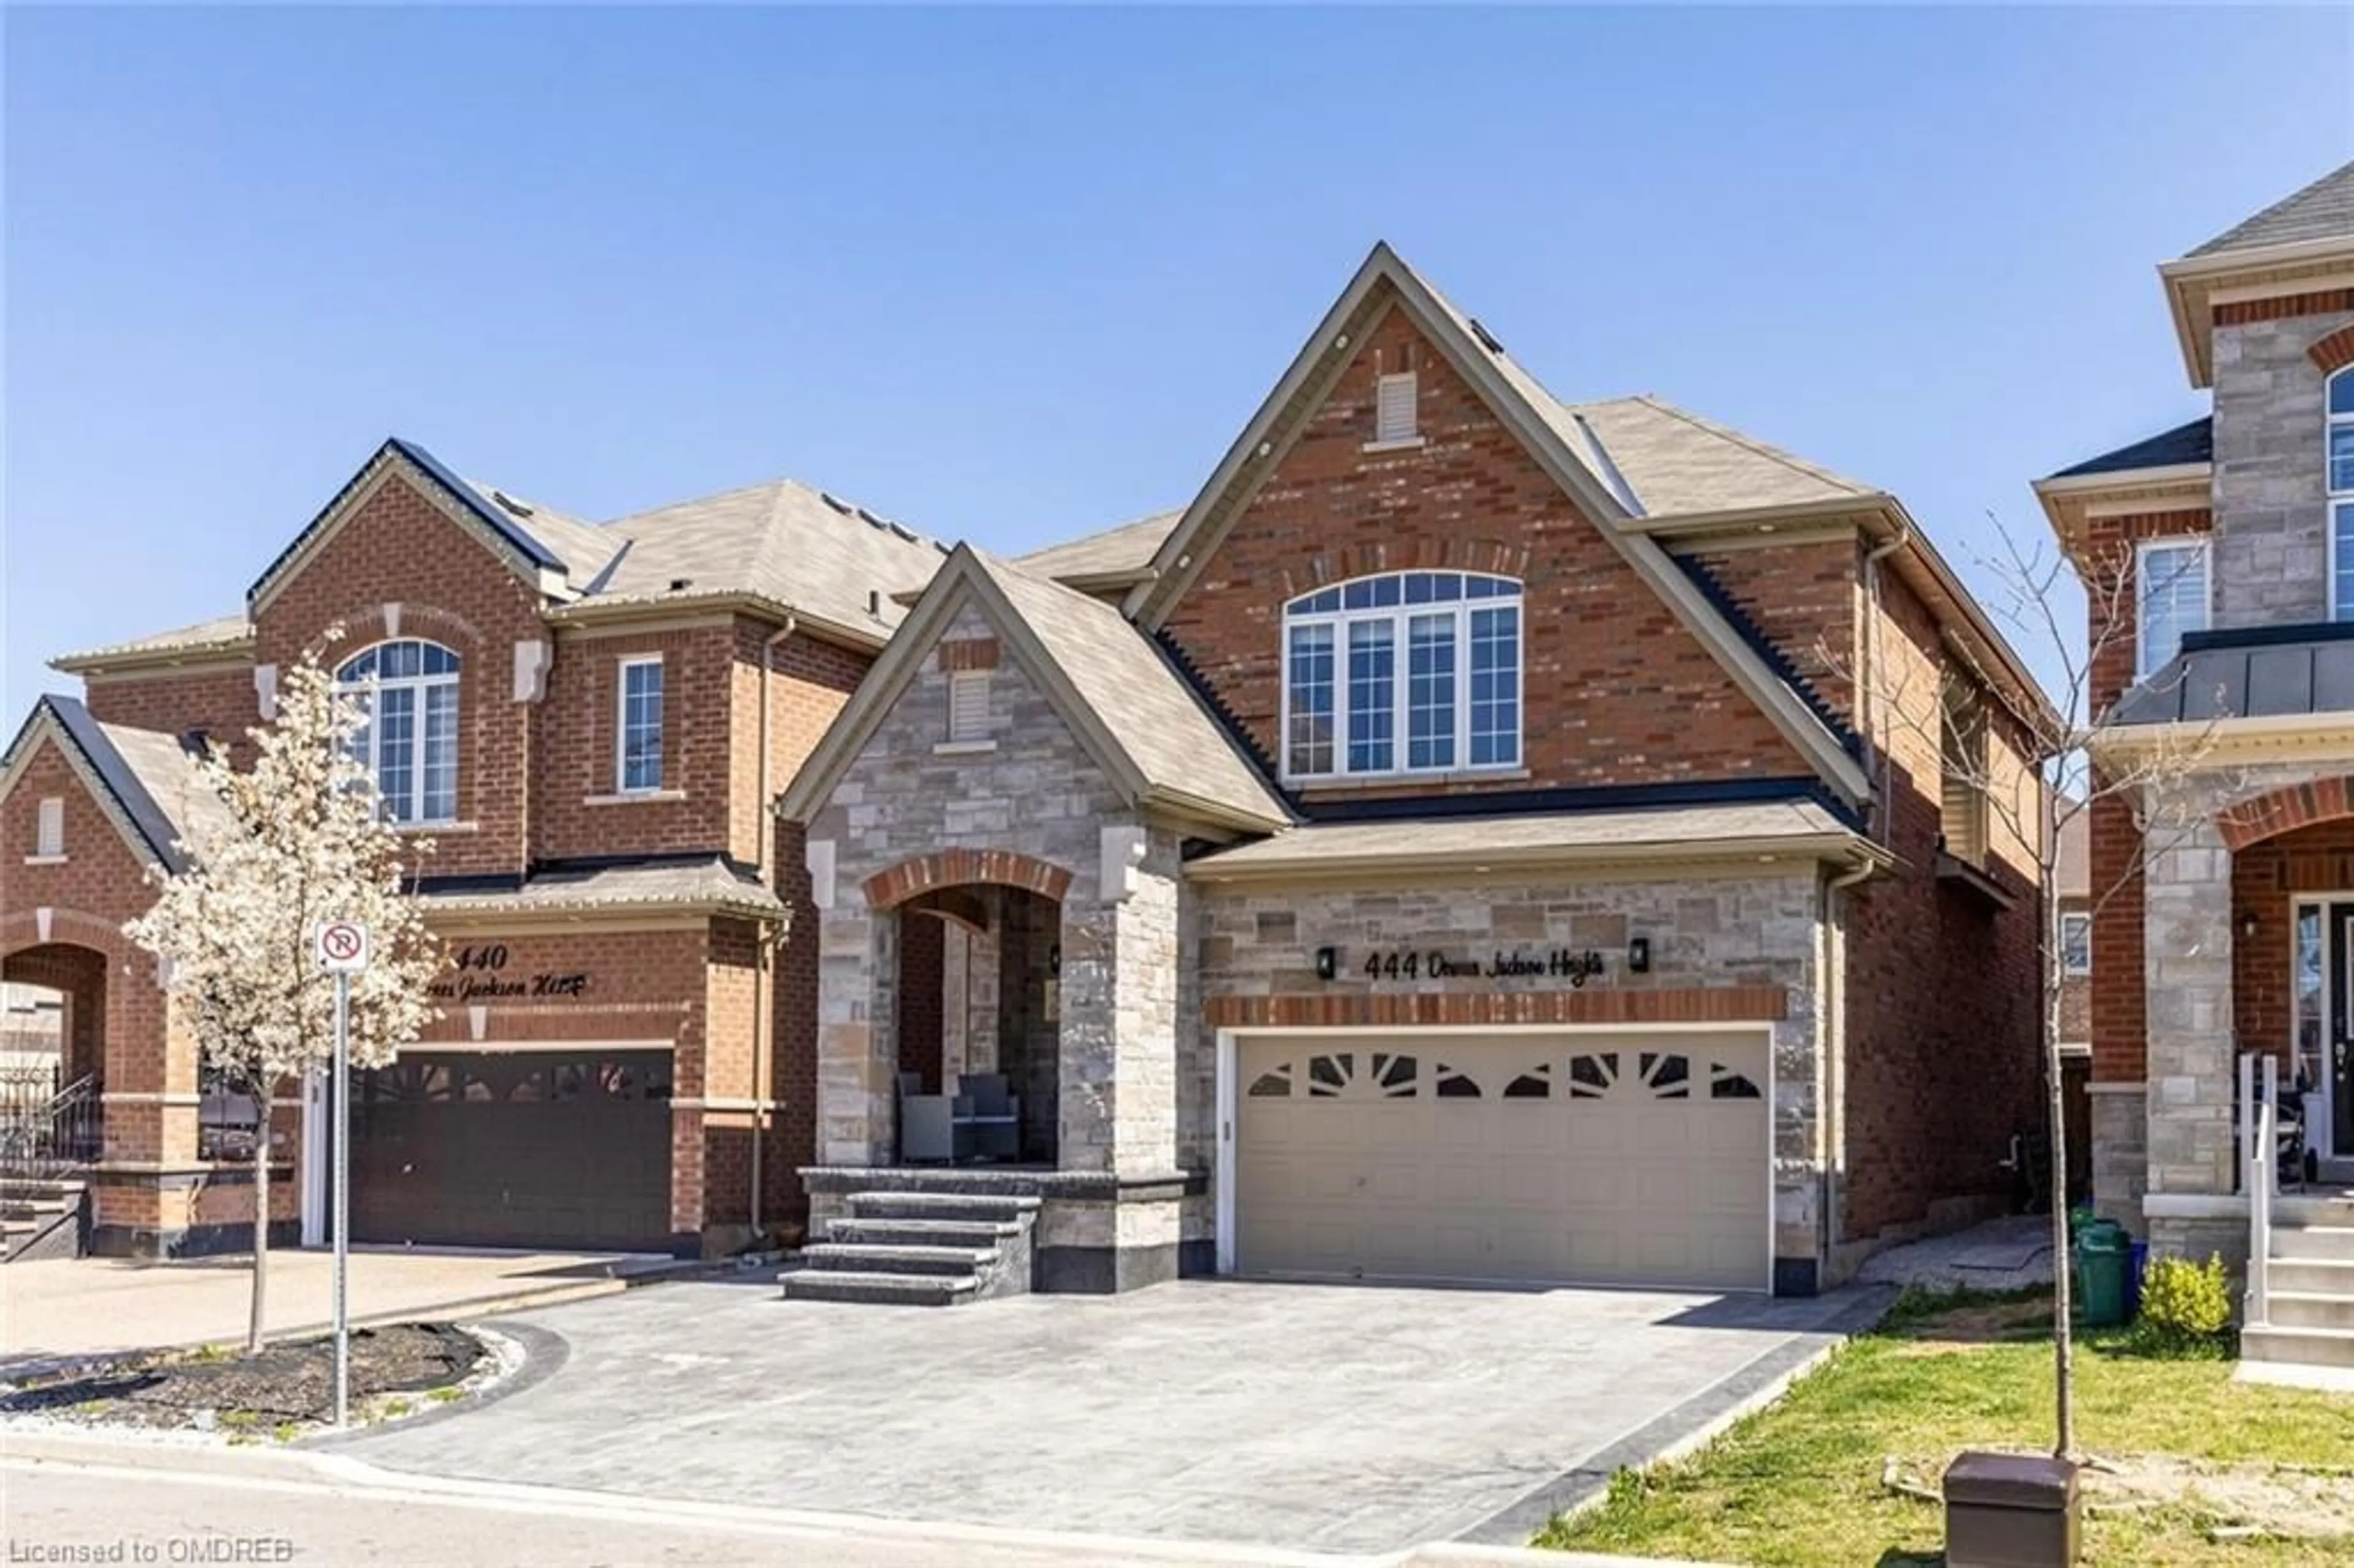 Home with brick exterior material for 444 Downes Jackson Hts, Milton Ontario L9T 7V1